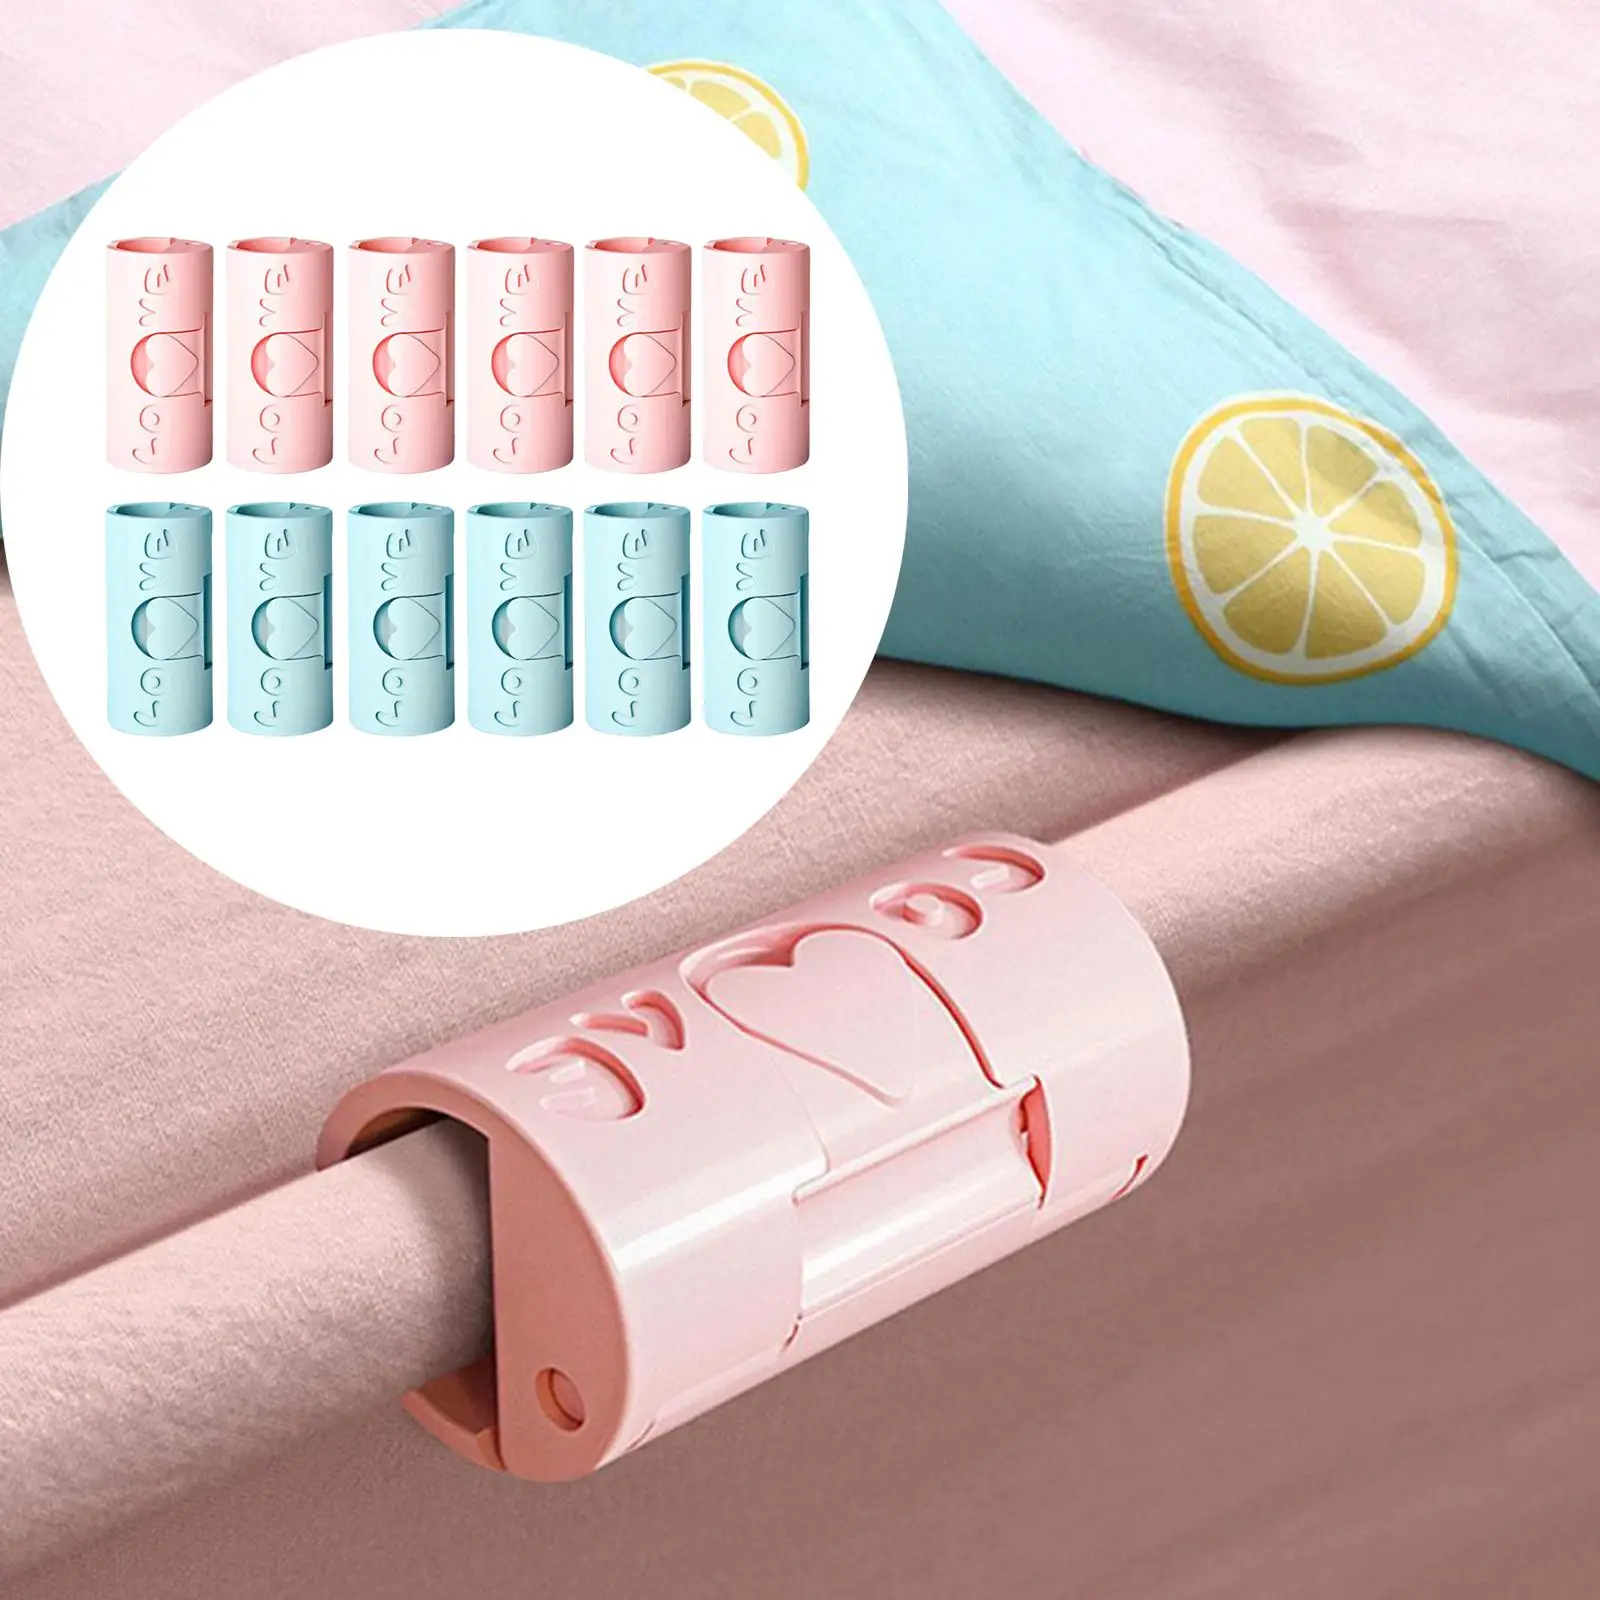 6Pcs Bed Sheet Clips Needleless Organizer Clamp for Fixing Comforter Towels Mattress Covers